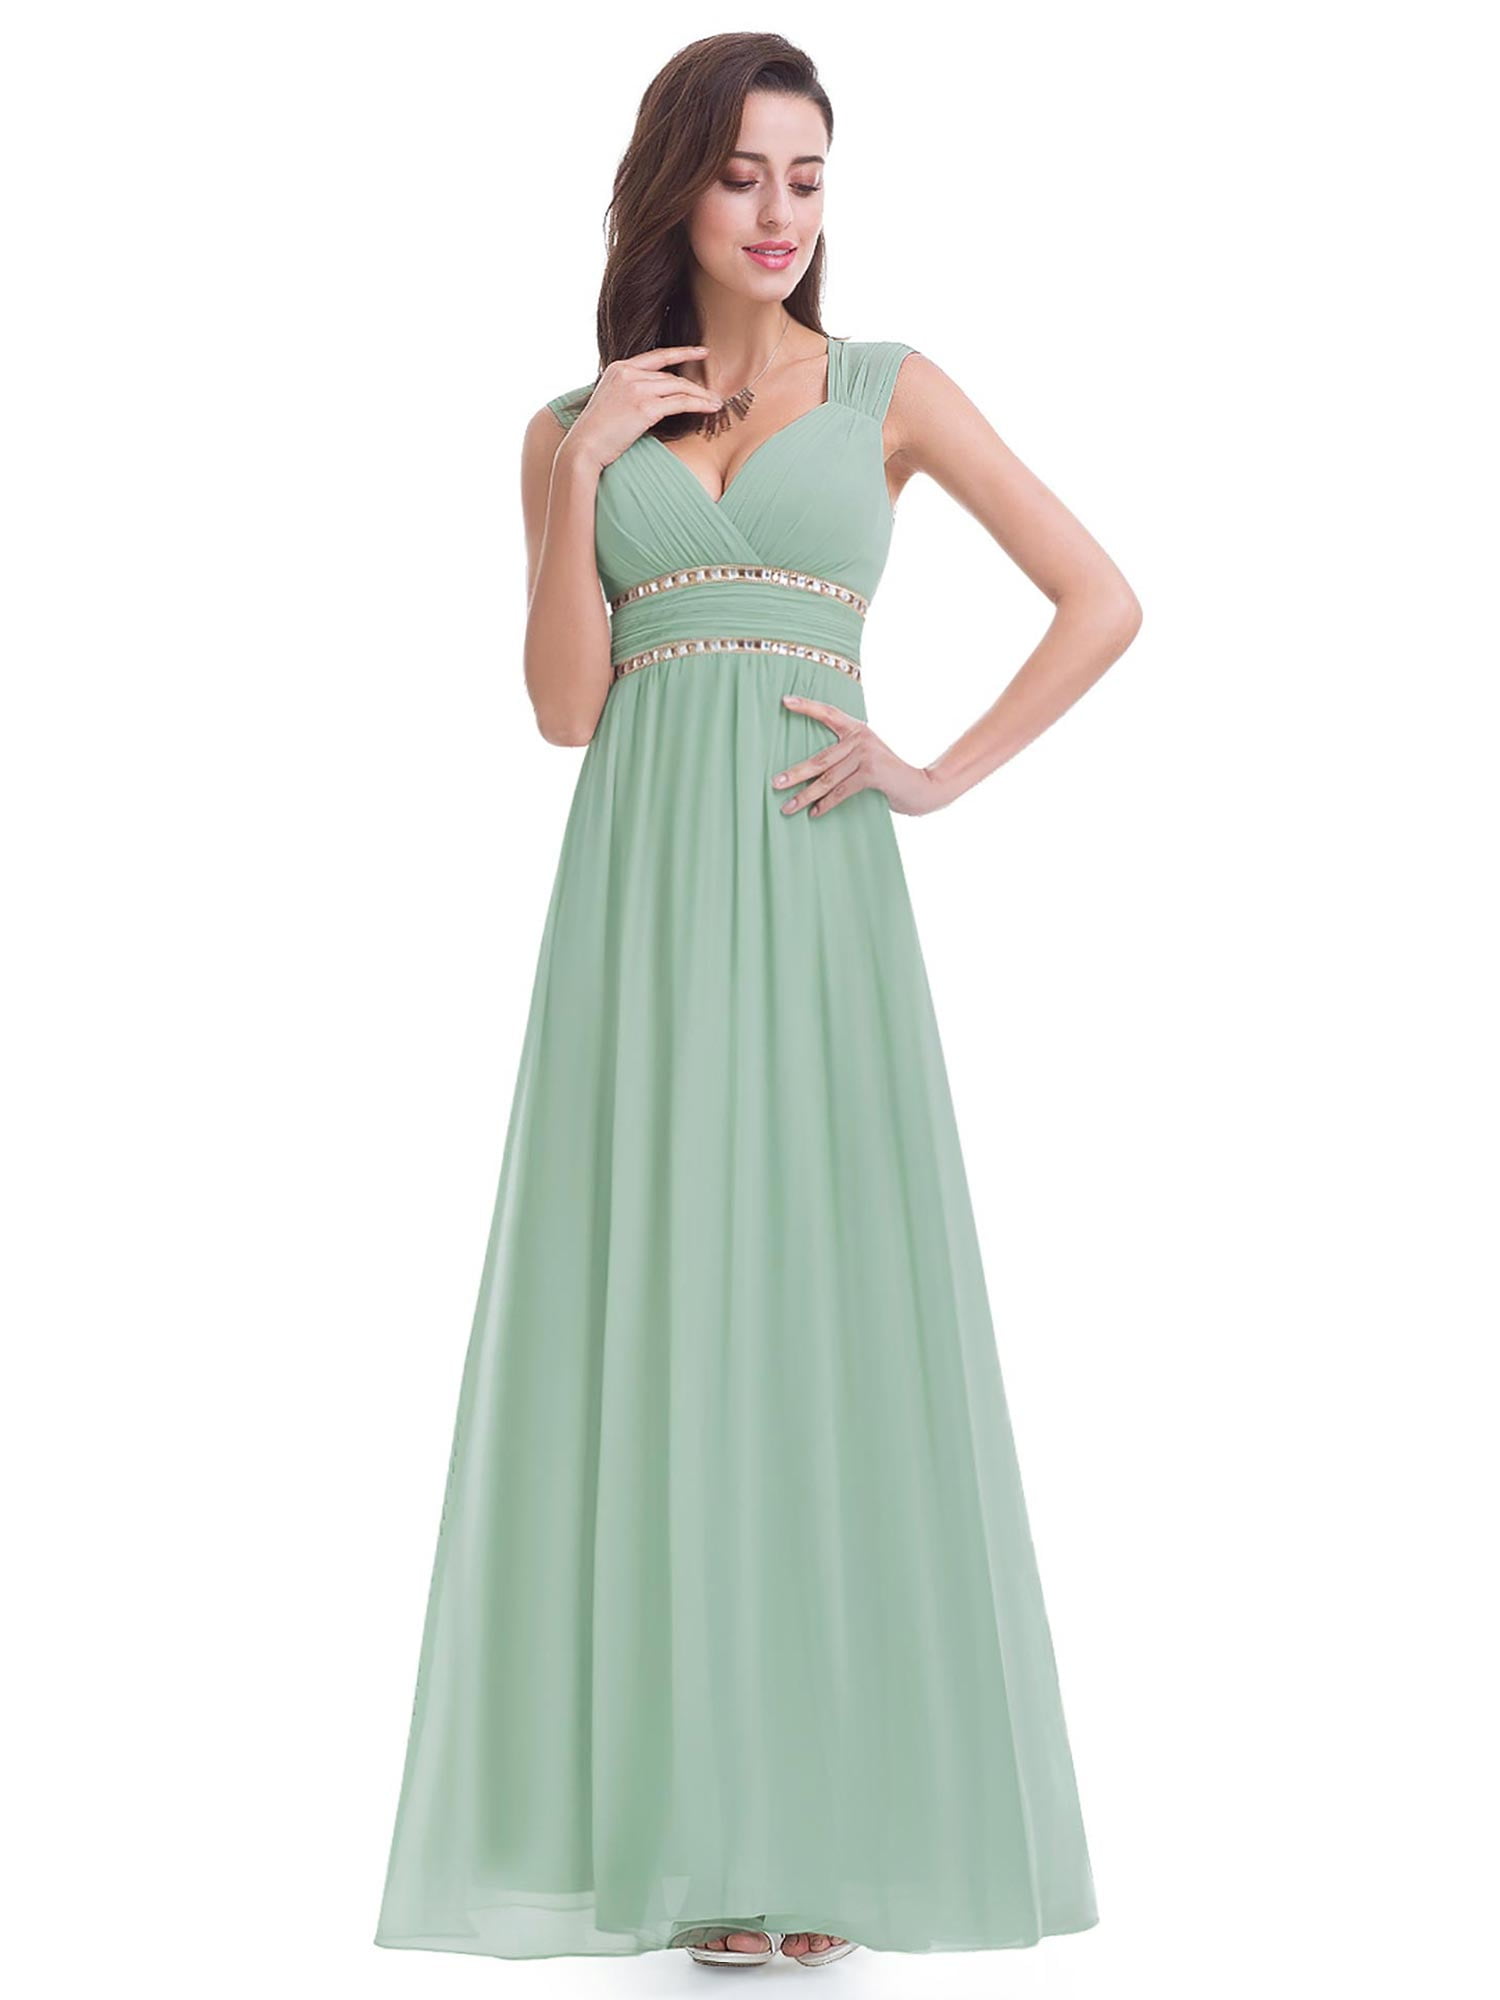 Women's Formal Long Bridesmaid Dresses Homecoming Prom Gown Cocktail Party Dress 